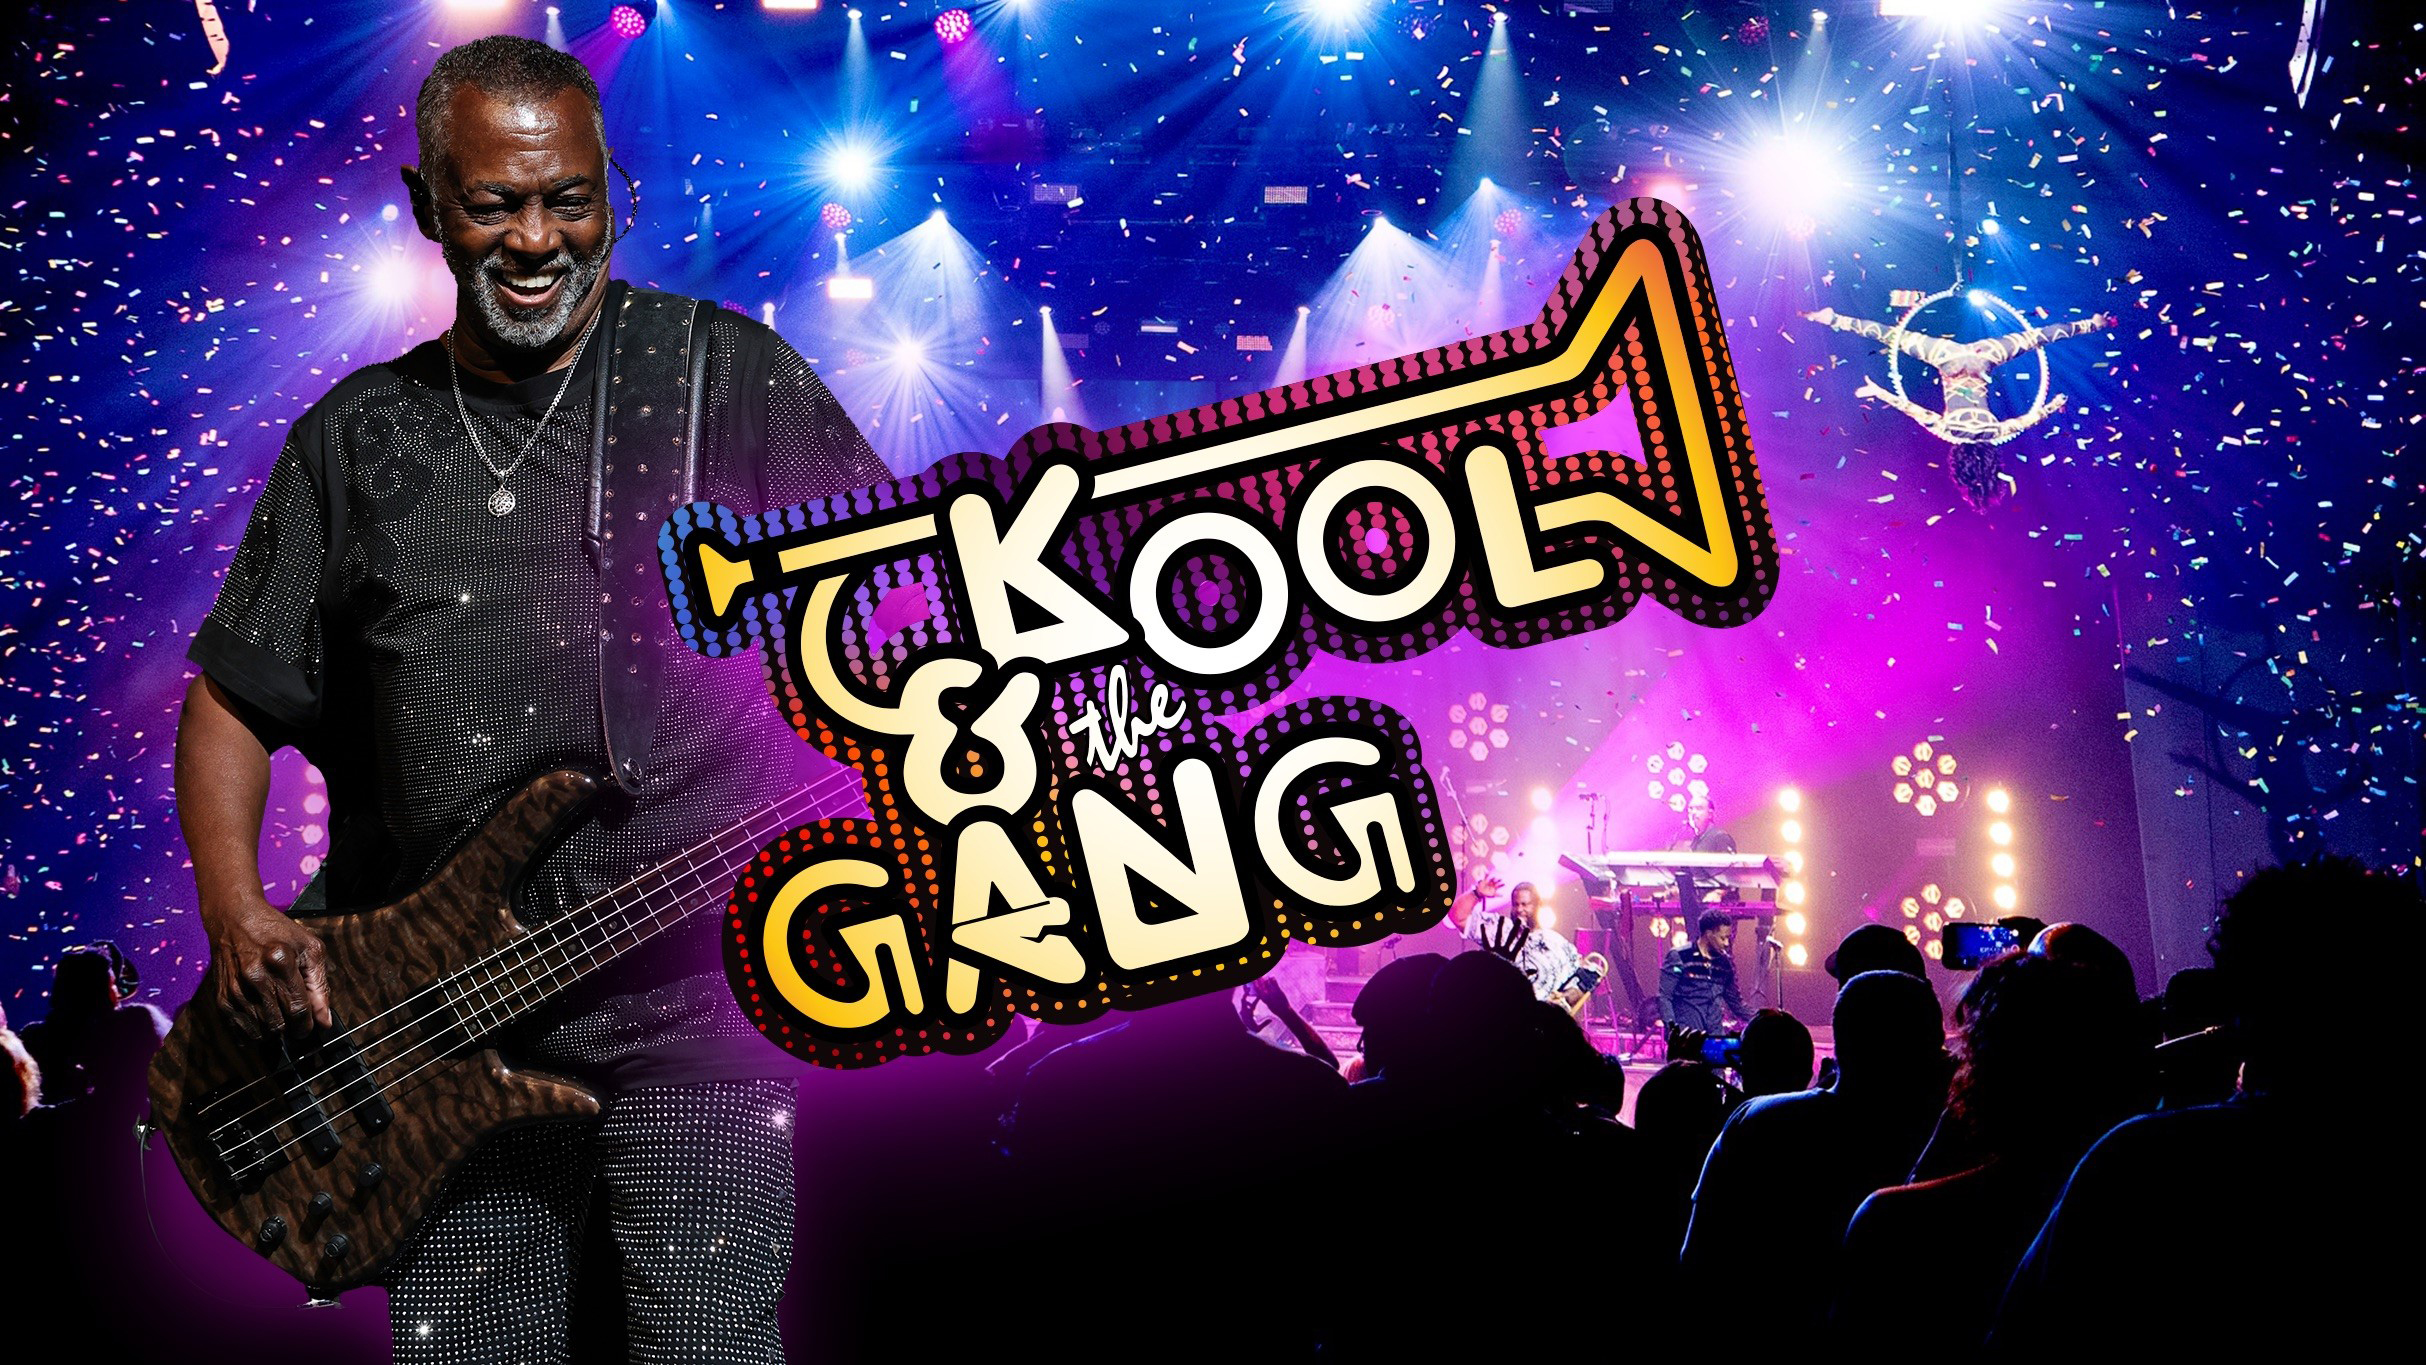 Kool And The Gang w/ Morris Day and the Time